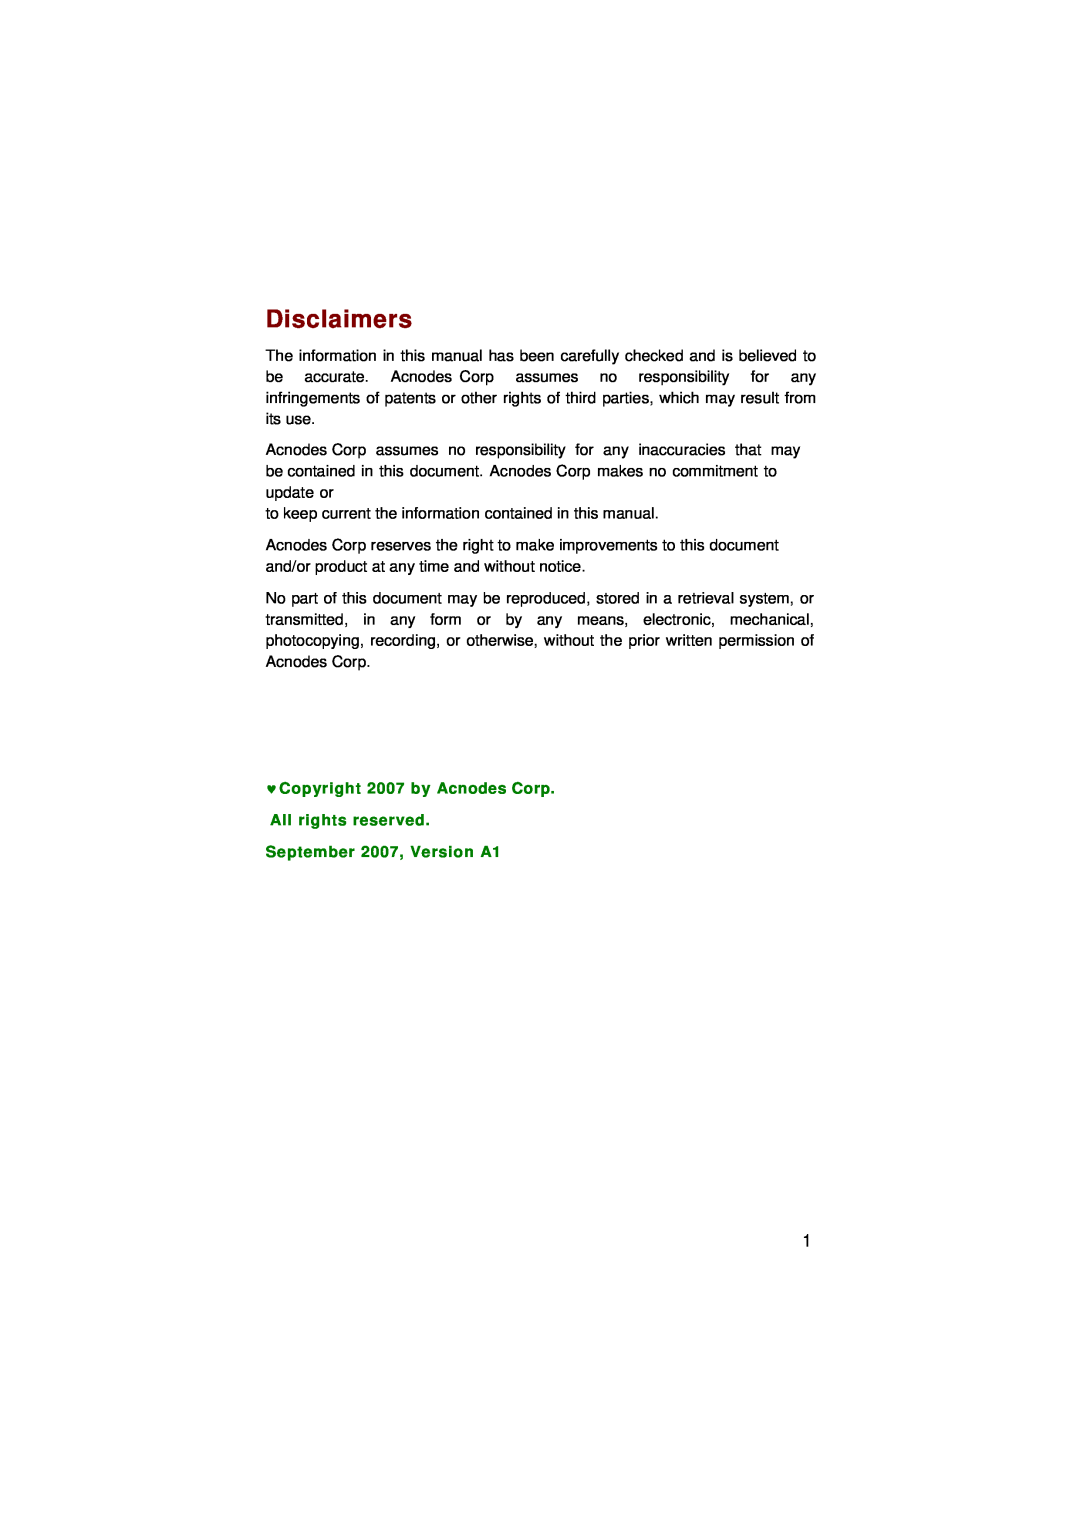 Acnodes FPC 8059 user manual Disclaimers, Copyright 2007 by Acnodes Corp All rights reserved, September 2007, Version A1 